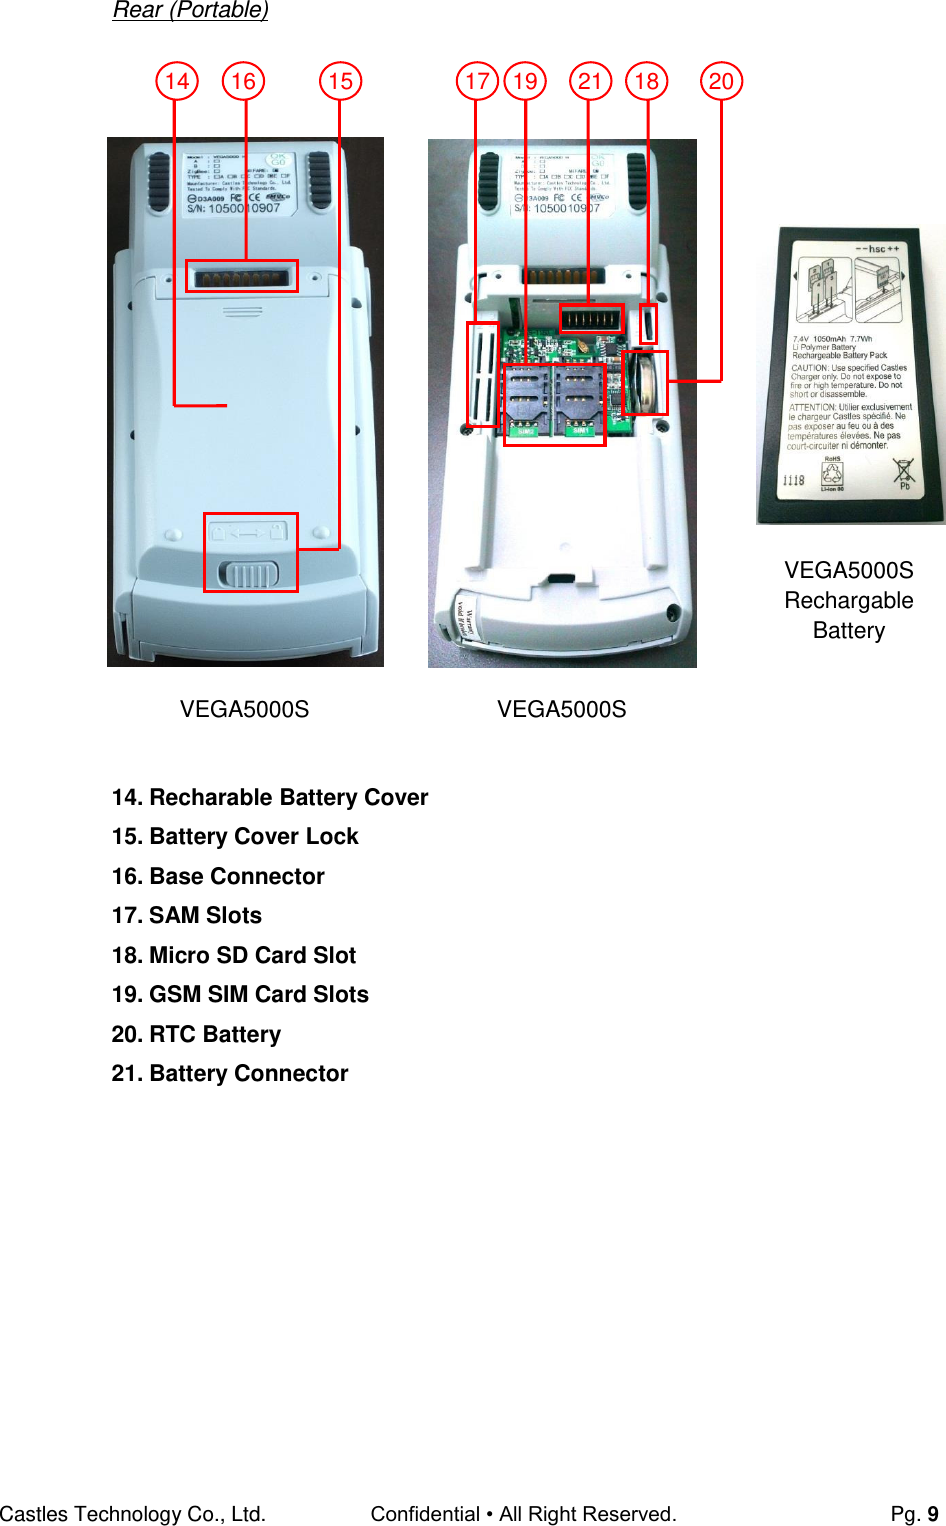 Castles Technology Co., Ltd. Confidential • All Right Reserved.  Pg. 9 Rear (Portable)                          14. Recharable Battery Cover 15. Battery Cover Lock 16. Base Connector 17. SAM Slots 18. Micro SD Card Slot 19. GSM SIM Card Slots 20. RTC Battery 21. Battery Connector                                           VEGA5000S  VEGA5000S VEGA5000S Rechargable Battery 14 16 15 19 17 21 18 20 